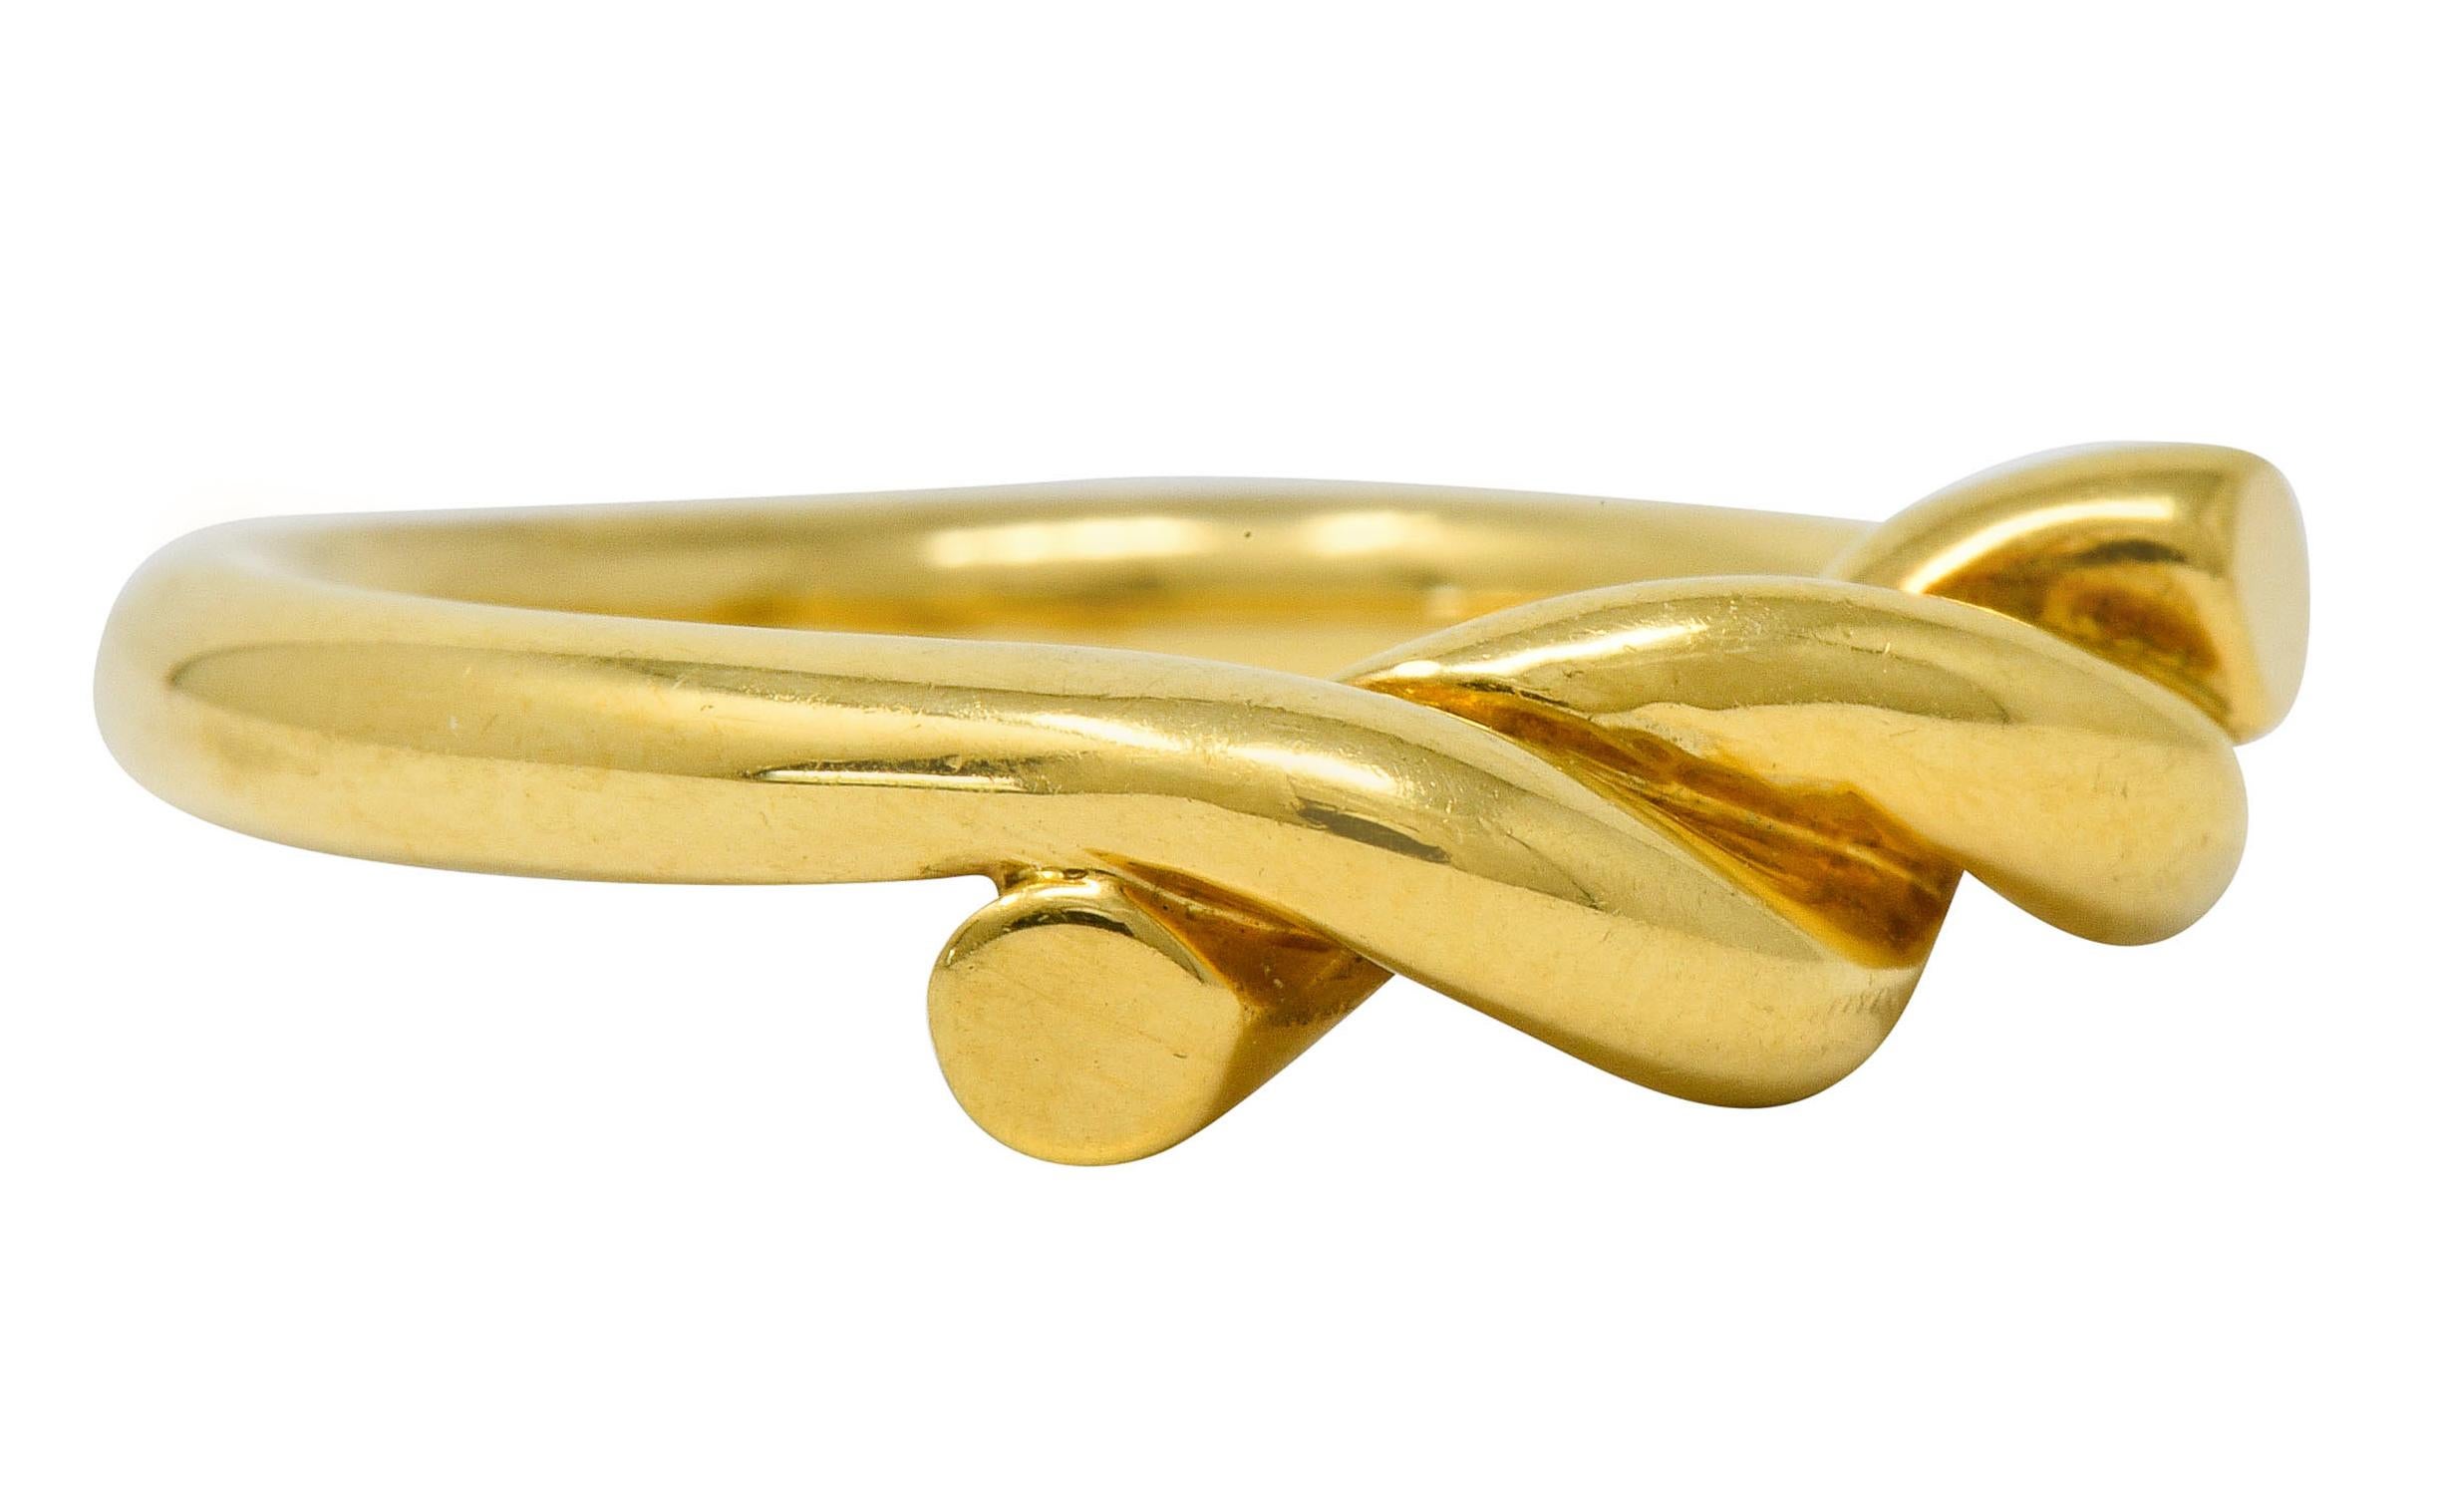 Band ring designed as a rope that twists together, cinching center as a knot

Featuring a bright polish

Fully signed Tiffany & Co.

Stamped 18K for 18 karat gold

Circa: 1980s

Ring Size: 6 1/4 & sizable

Measures: 5.4 mm wide and sits 5.0 mm